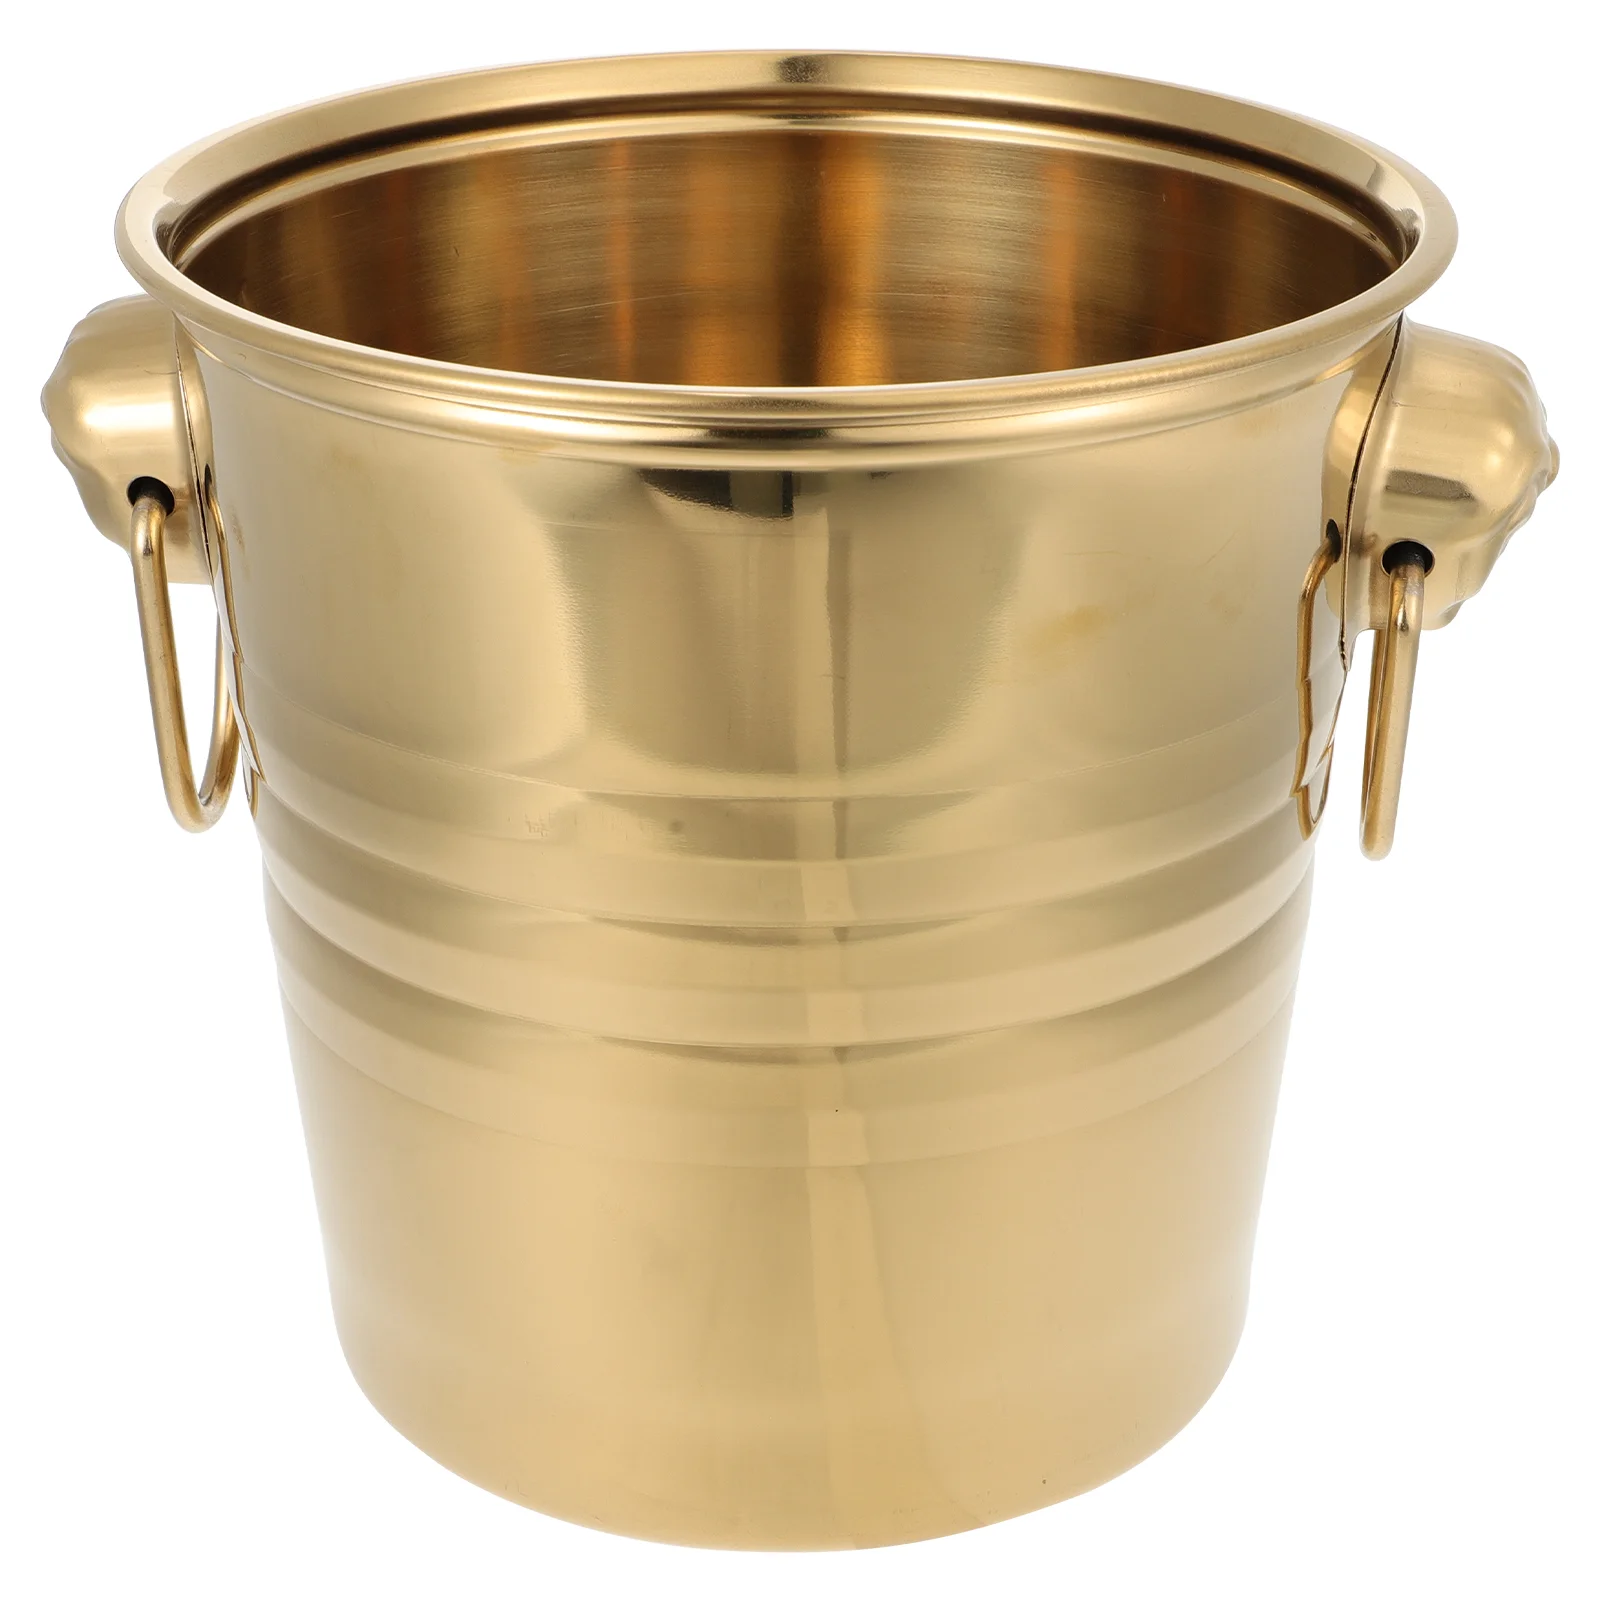 

Go Food Containers Lids Ice Bucket Kitchen Anti-rust Champagne Iced Beverage 19x18.5cm Bottle Gathering Golden Stainless Steel